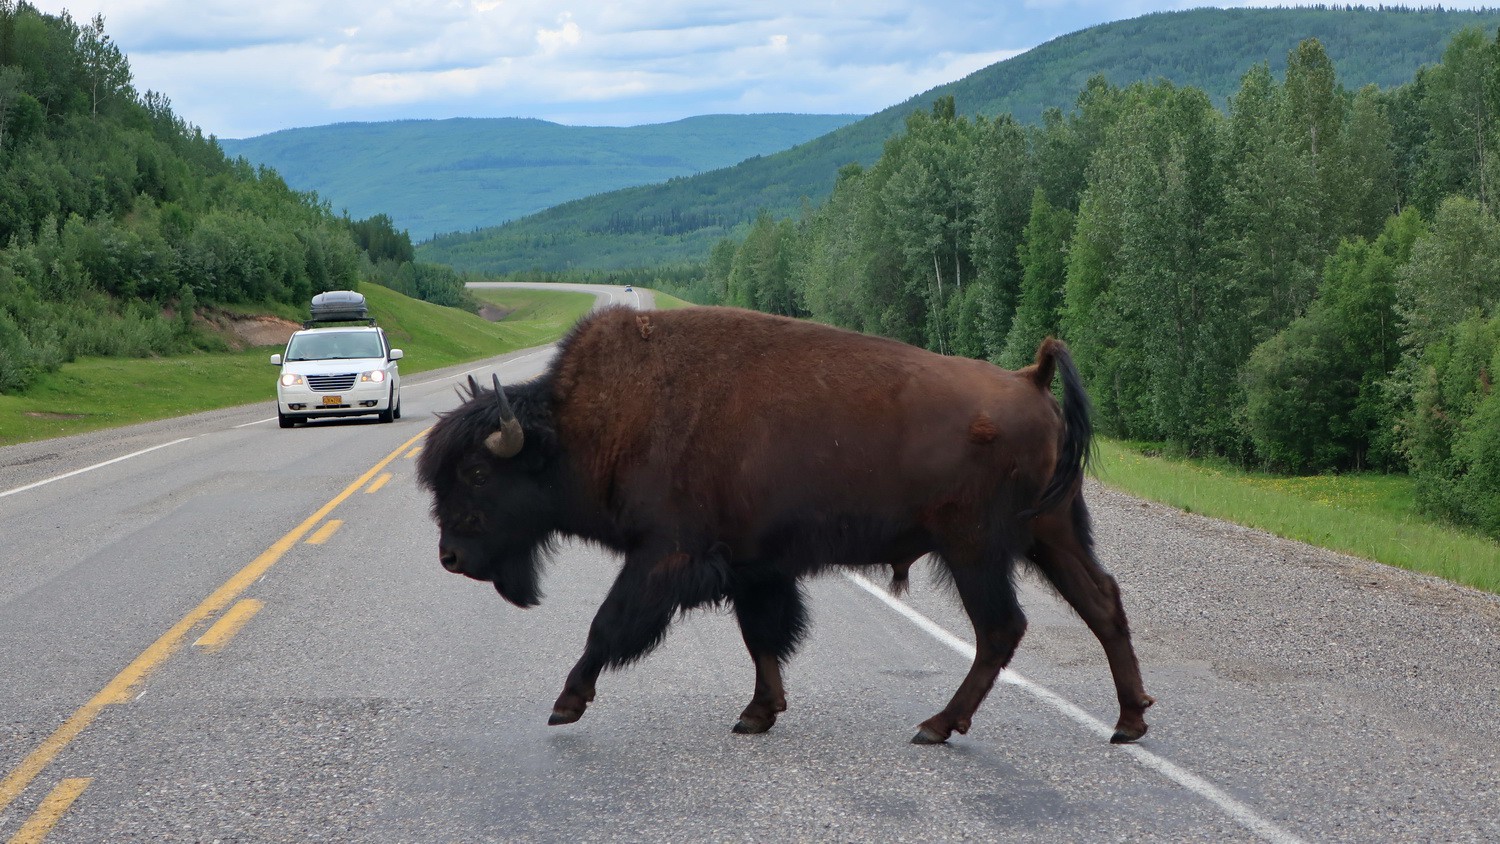 Indeed a Wood Bison is crossing the street which is the largest land animal of North America